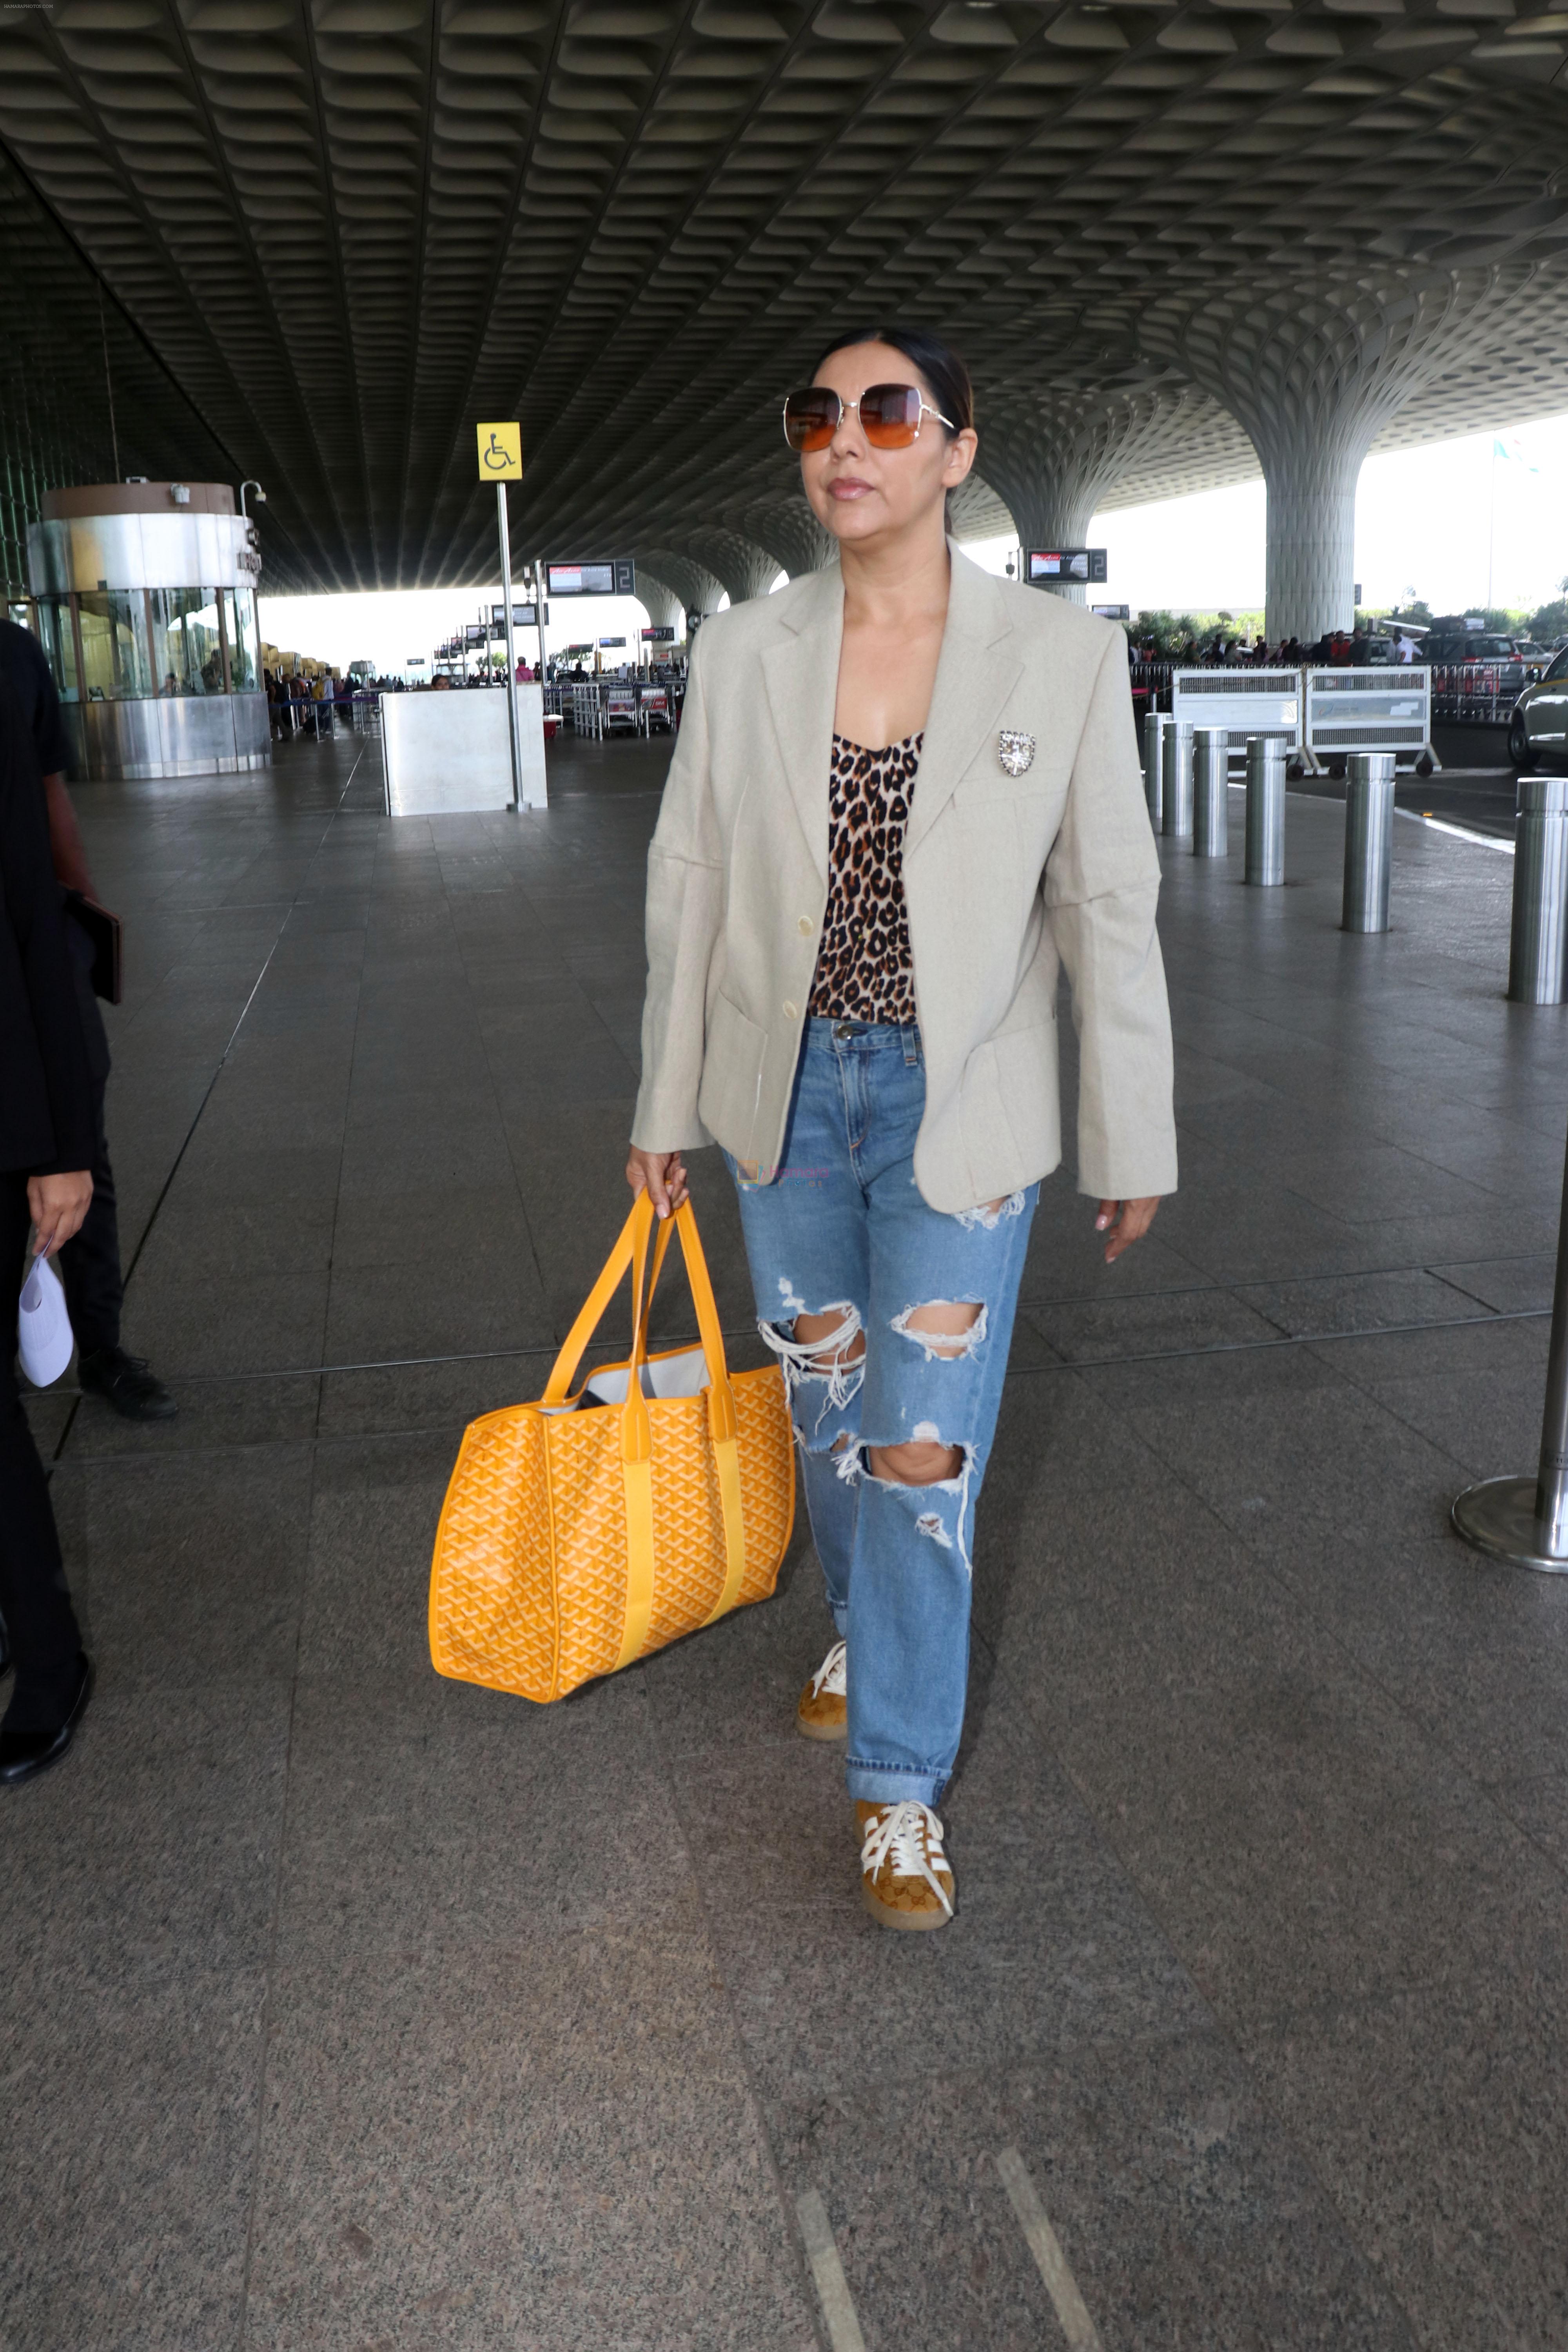 Gauahar Khan holding Villette Tote Bag wearing Gazelle Gucci Mesa White Red shoes, Balmain distressed effect finish jeans, overcoat and sunglasses